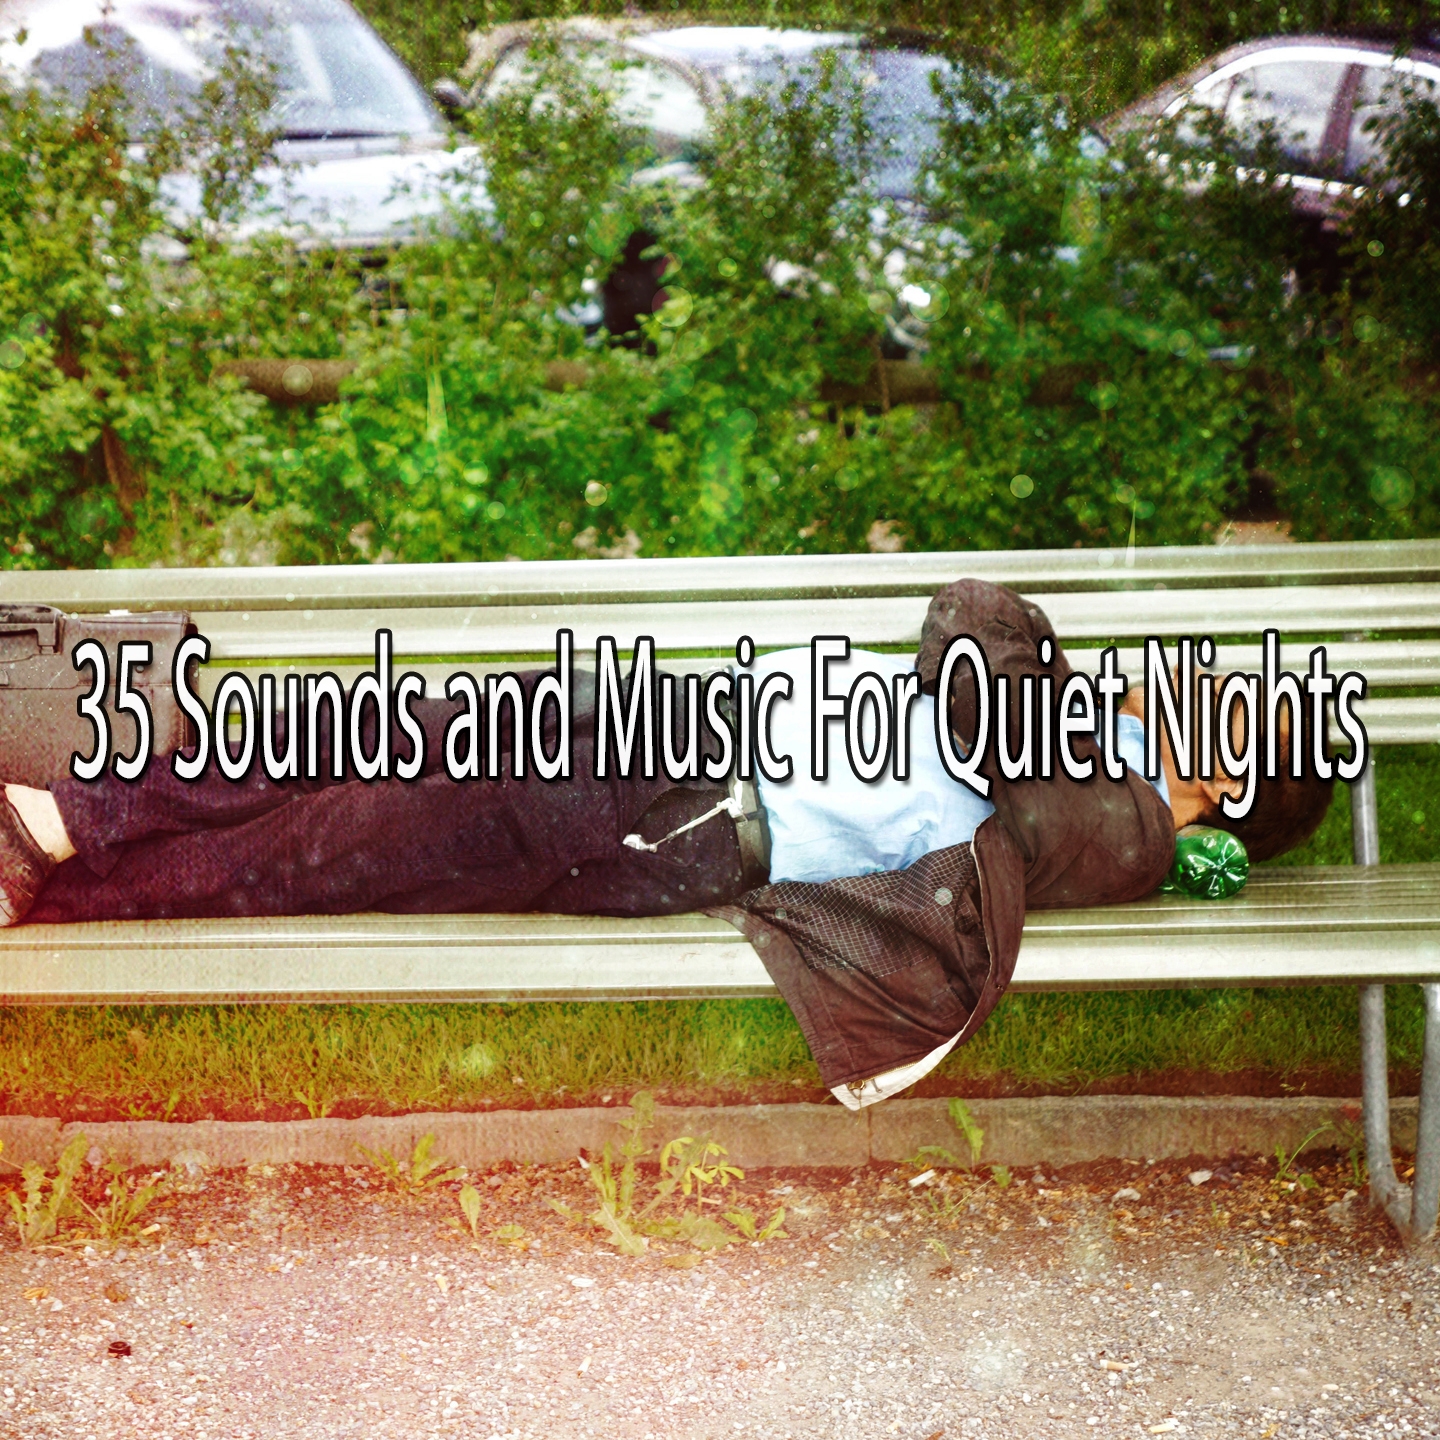 35 Sounds and Music For Quiet Nights